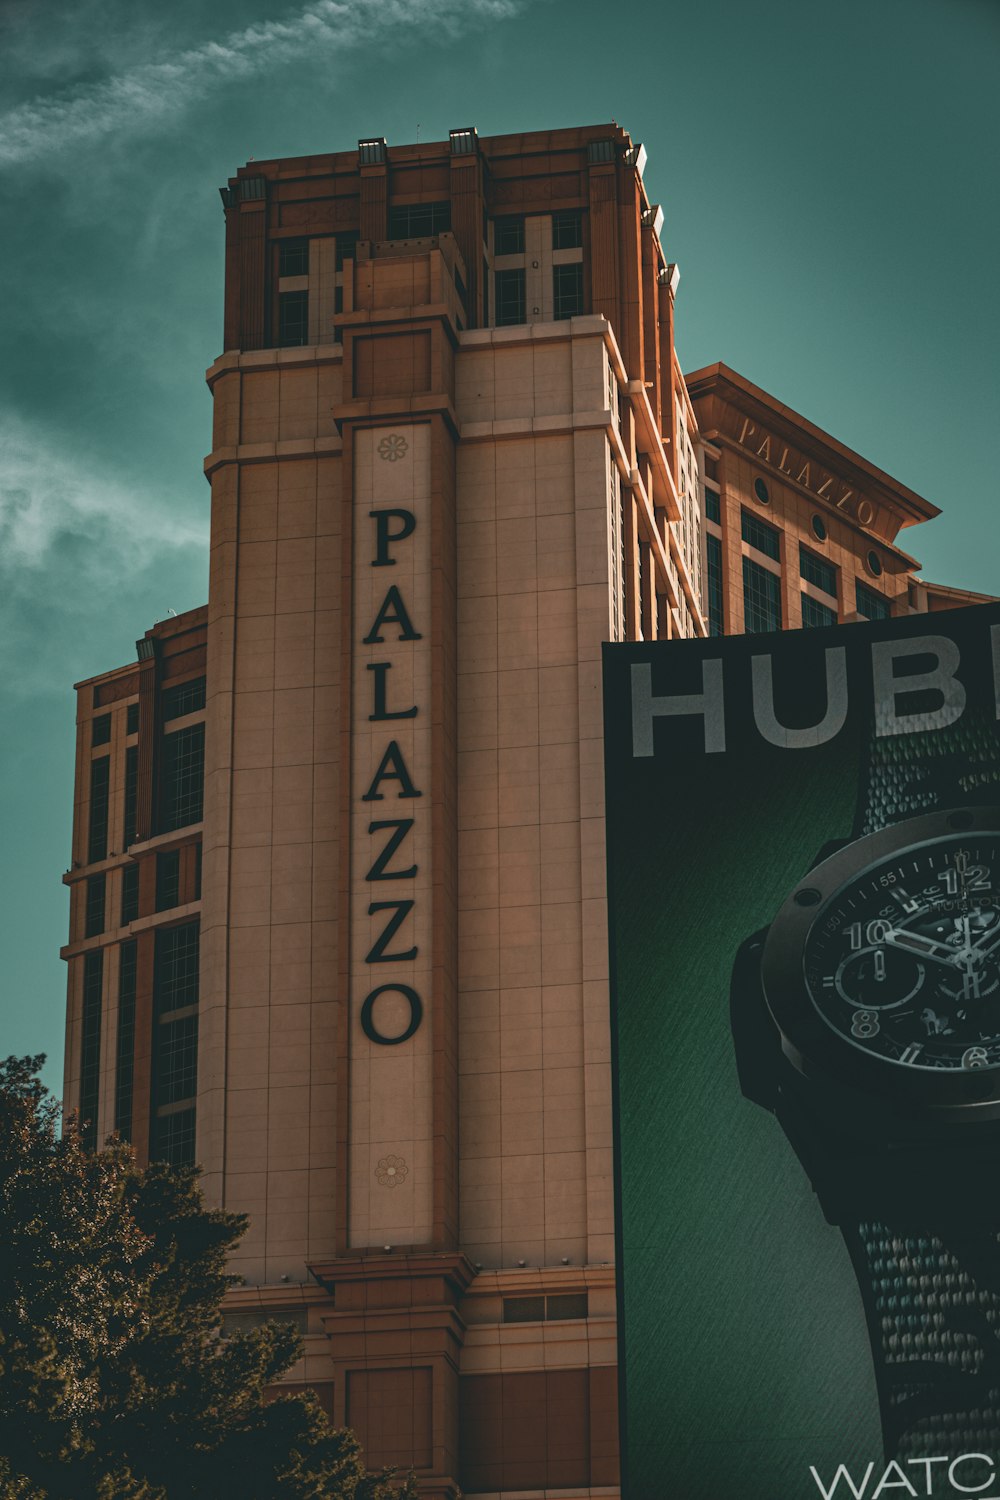 a watch advertisement on a building with a sky background